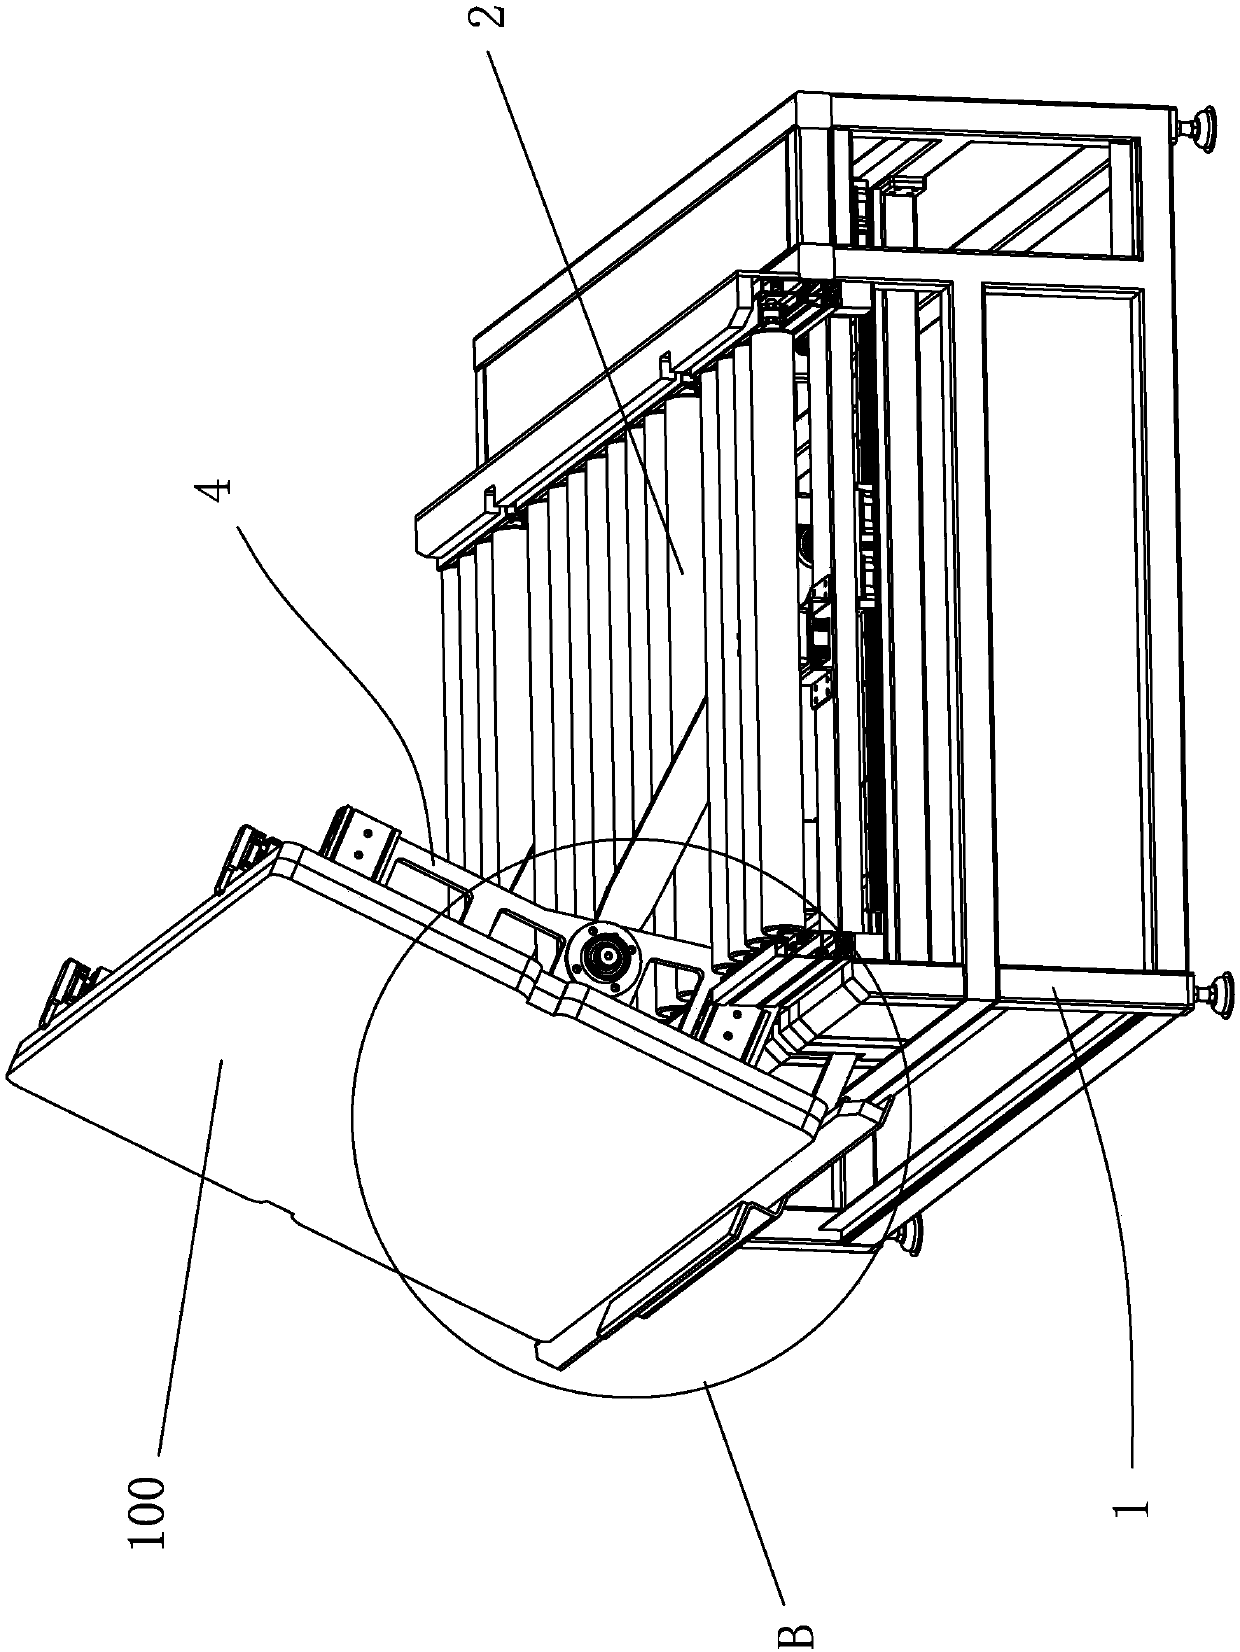 Screen feeding mechanism used for television assembling